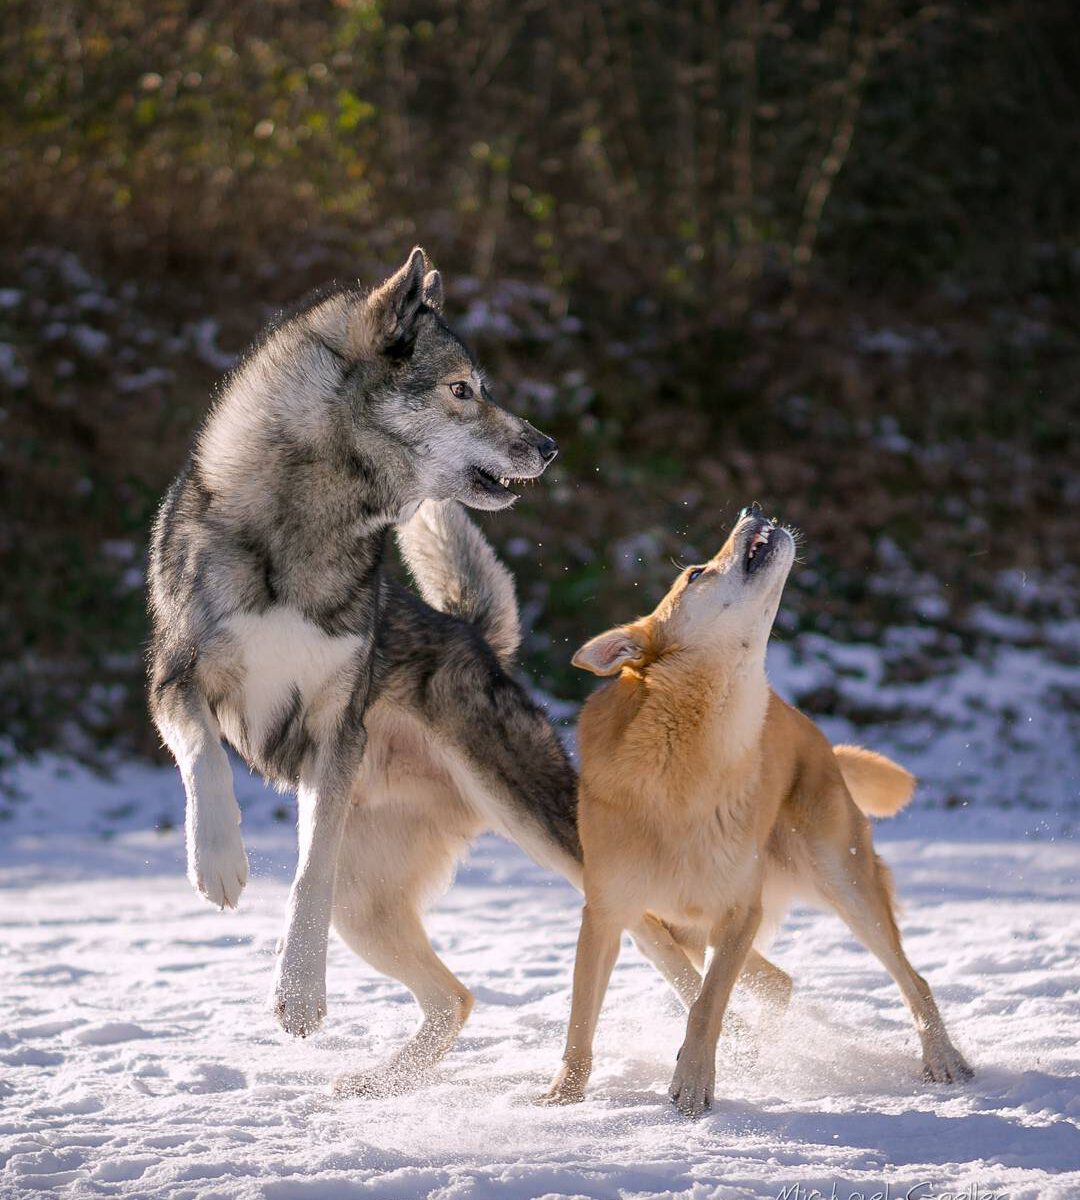 Ninja and Dingo Smilla playing in front of castle Fleckenstein.
.
There is a gre...